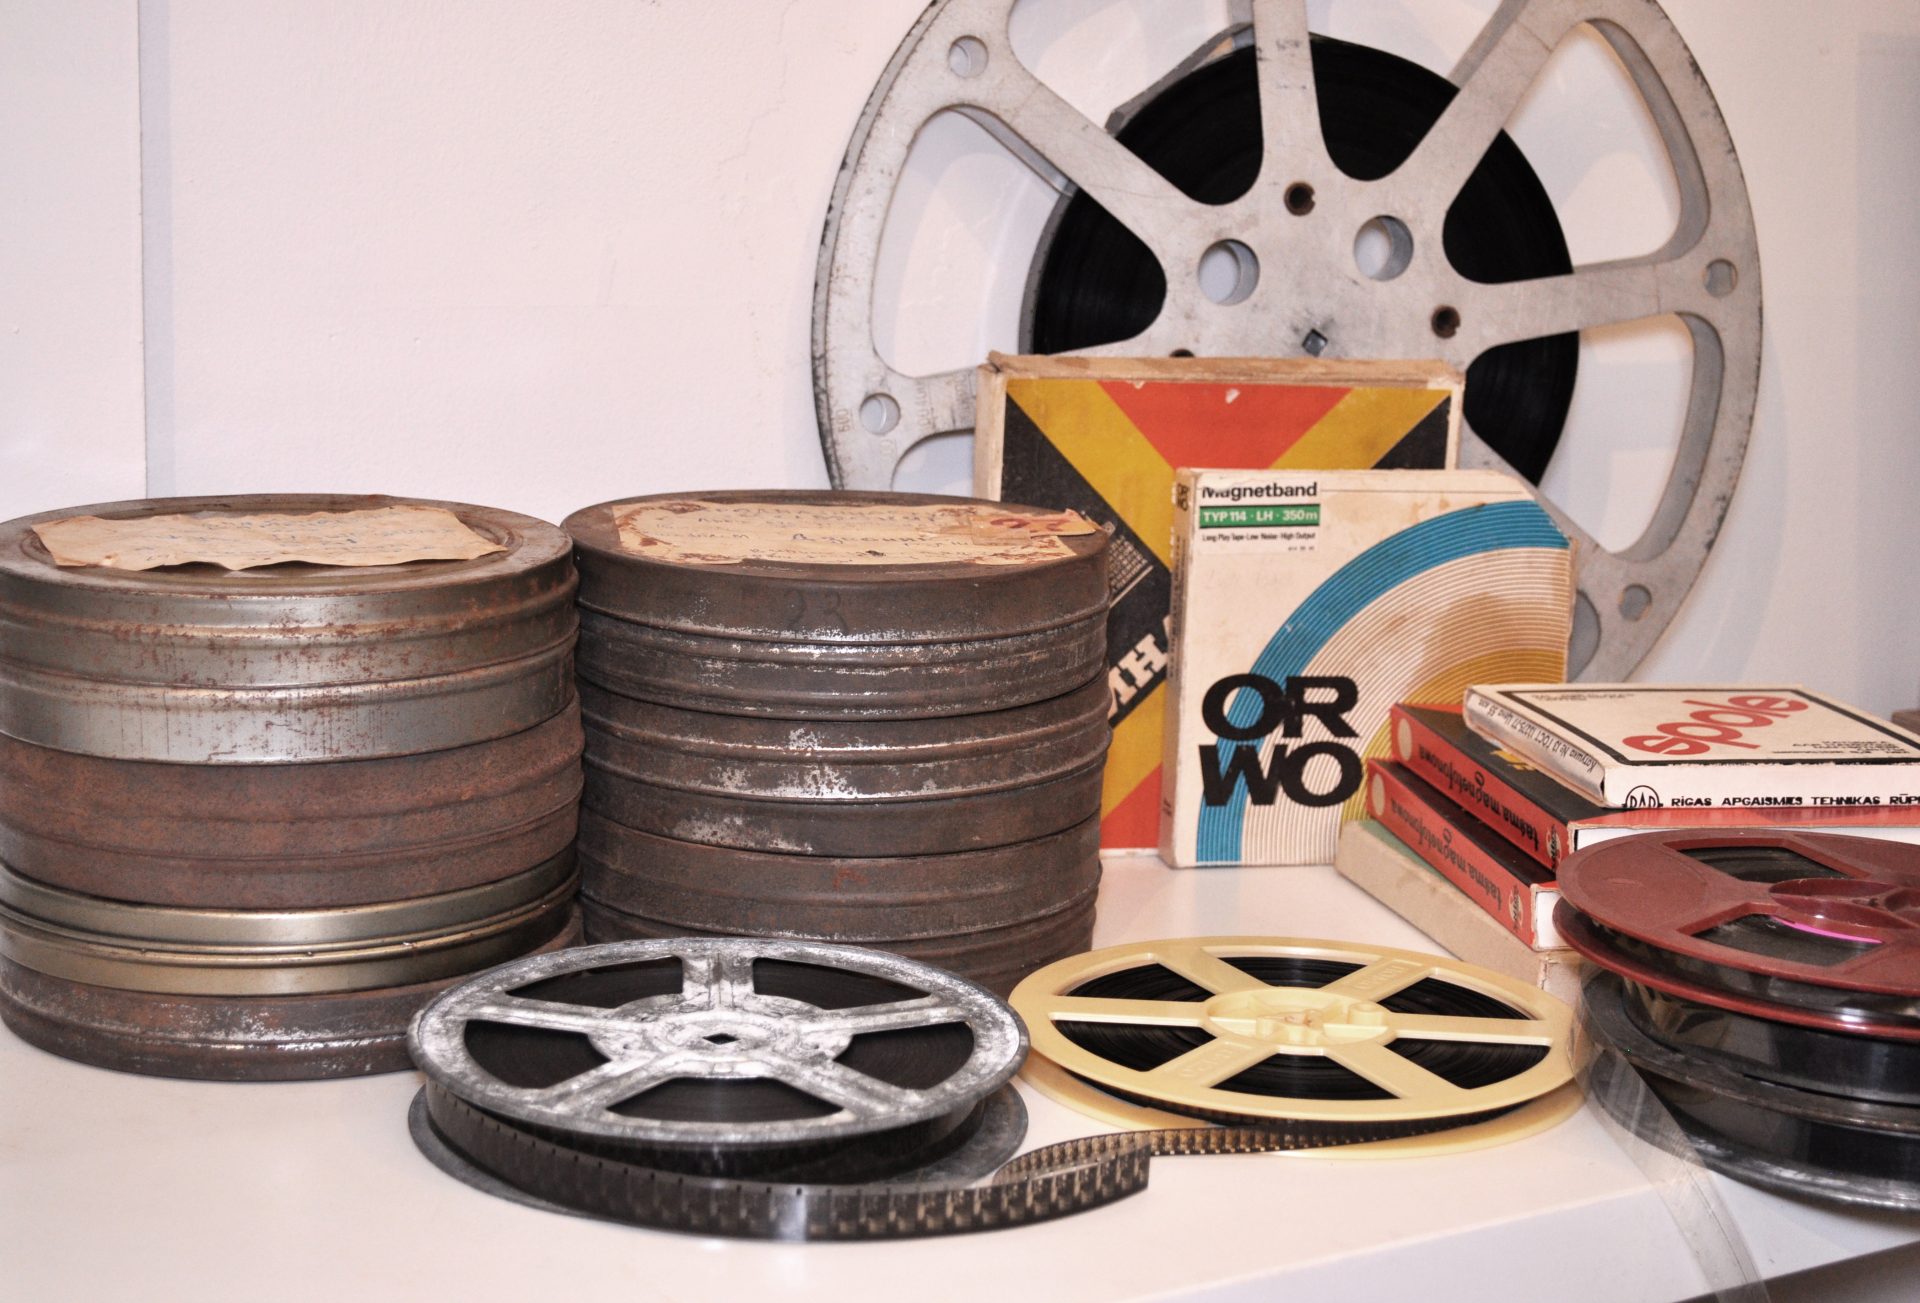 Call for Applications for Digitization of Amateur and Home Movie Archives.